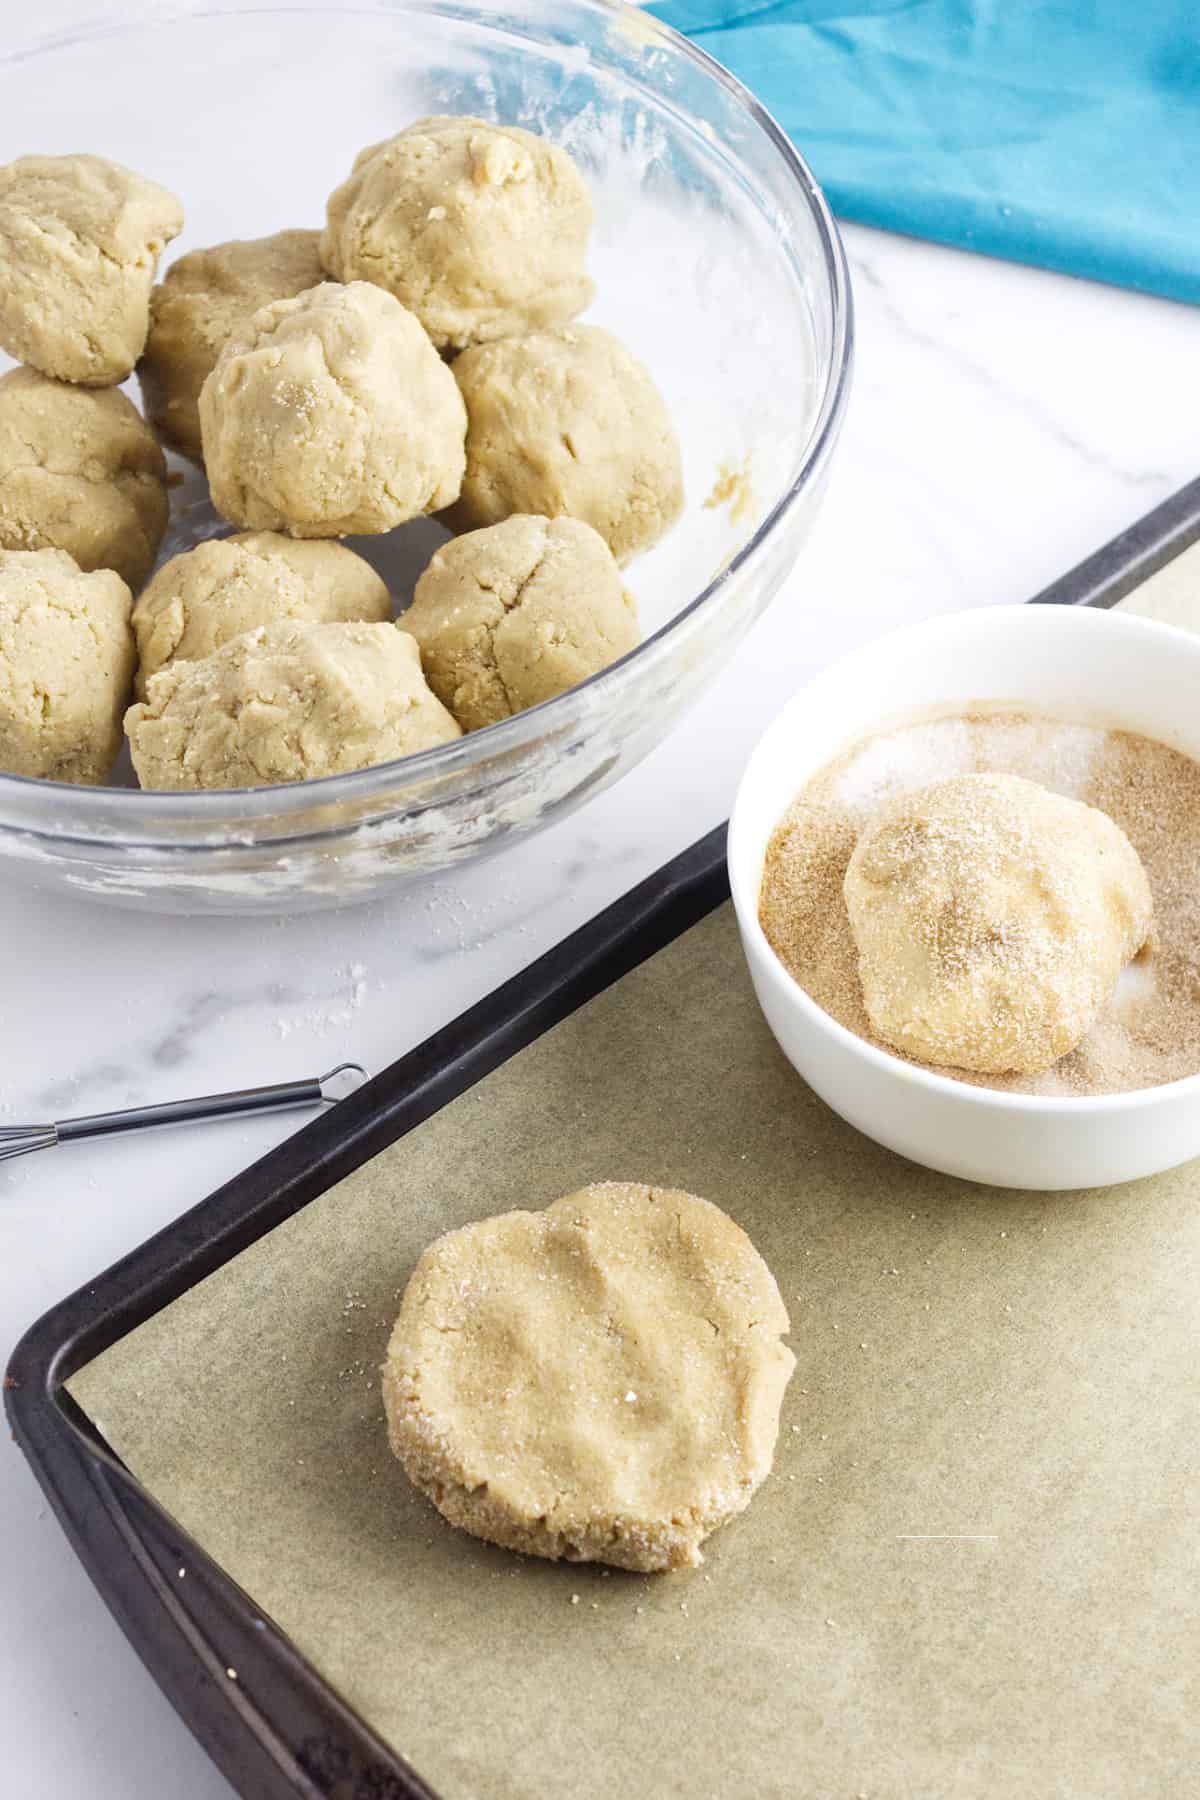 balls of cookie dough rolled in cinnamon sugar for crumbl churro cookie.